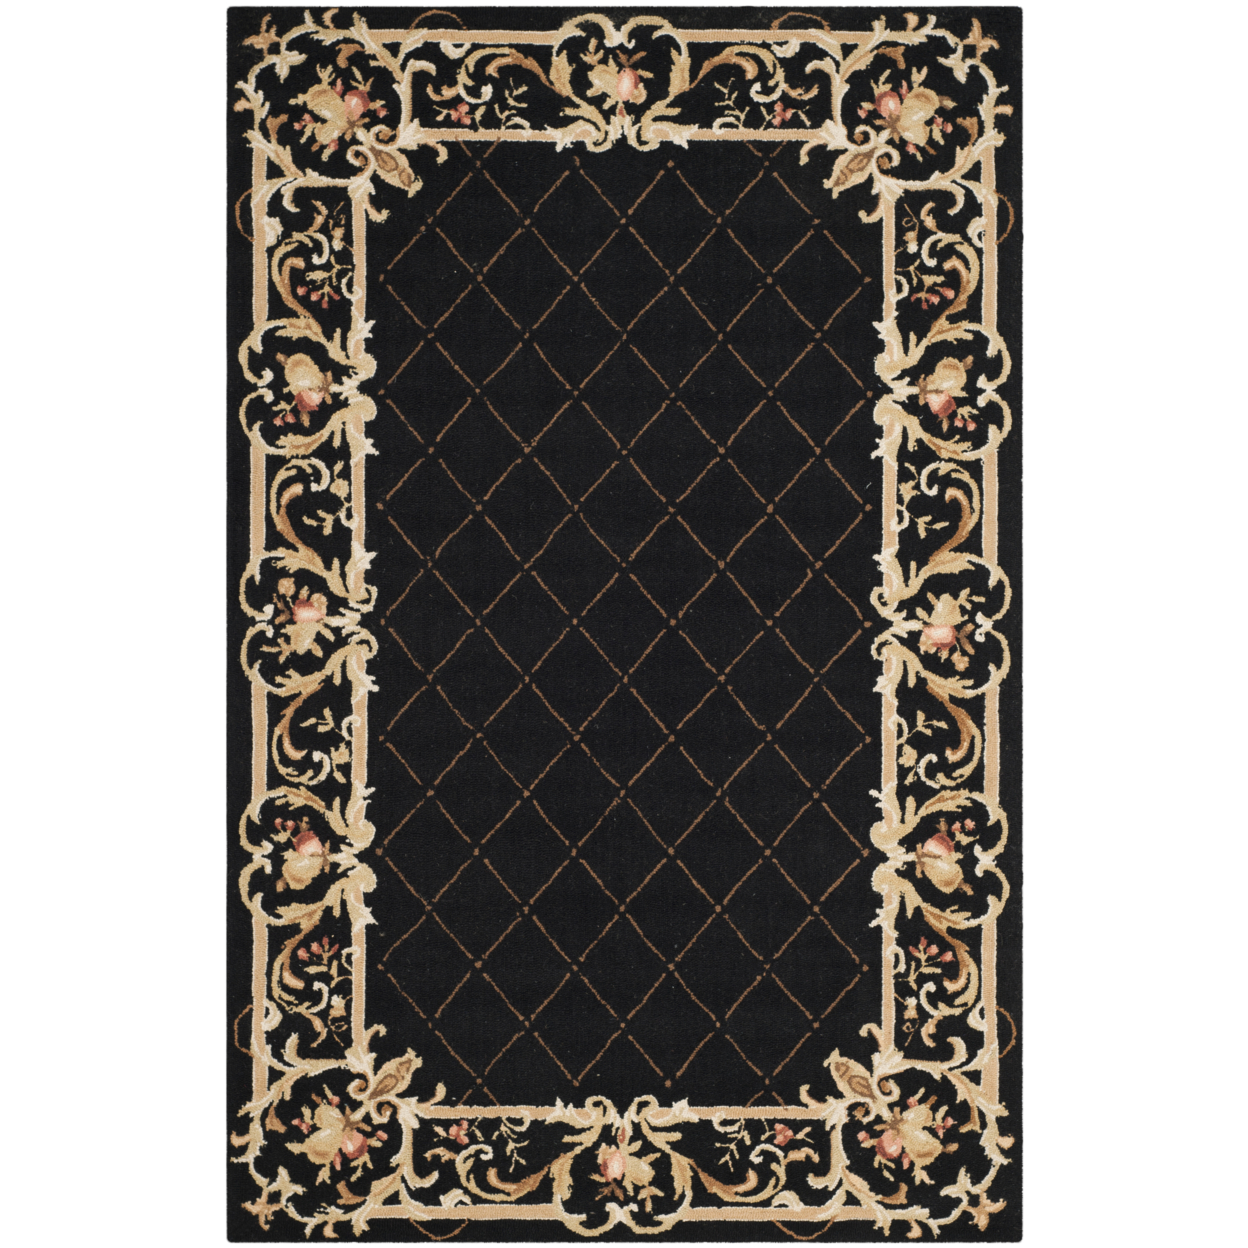 SAFAVIEH Chelsea Collection HK333B Hand-hooked Black Rug - 6' X 9'